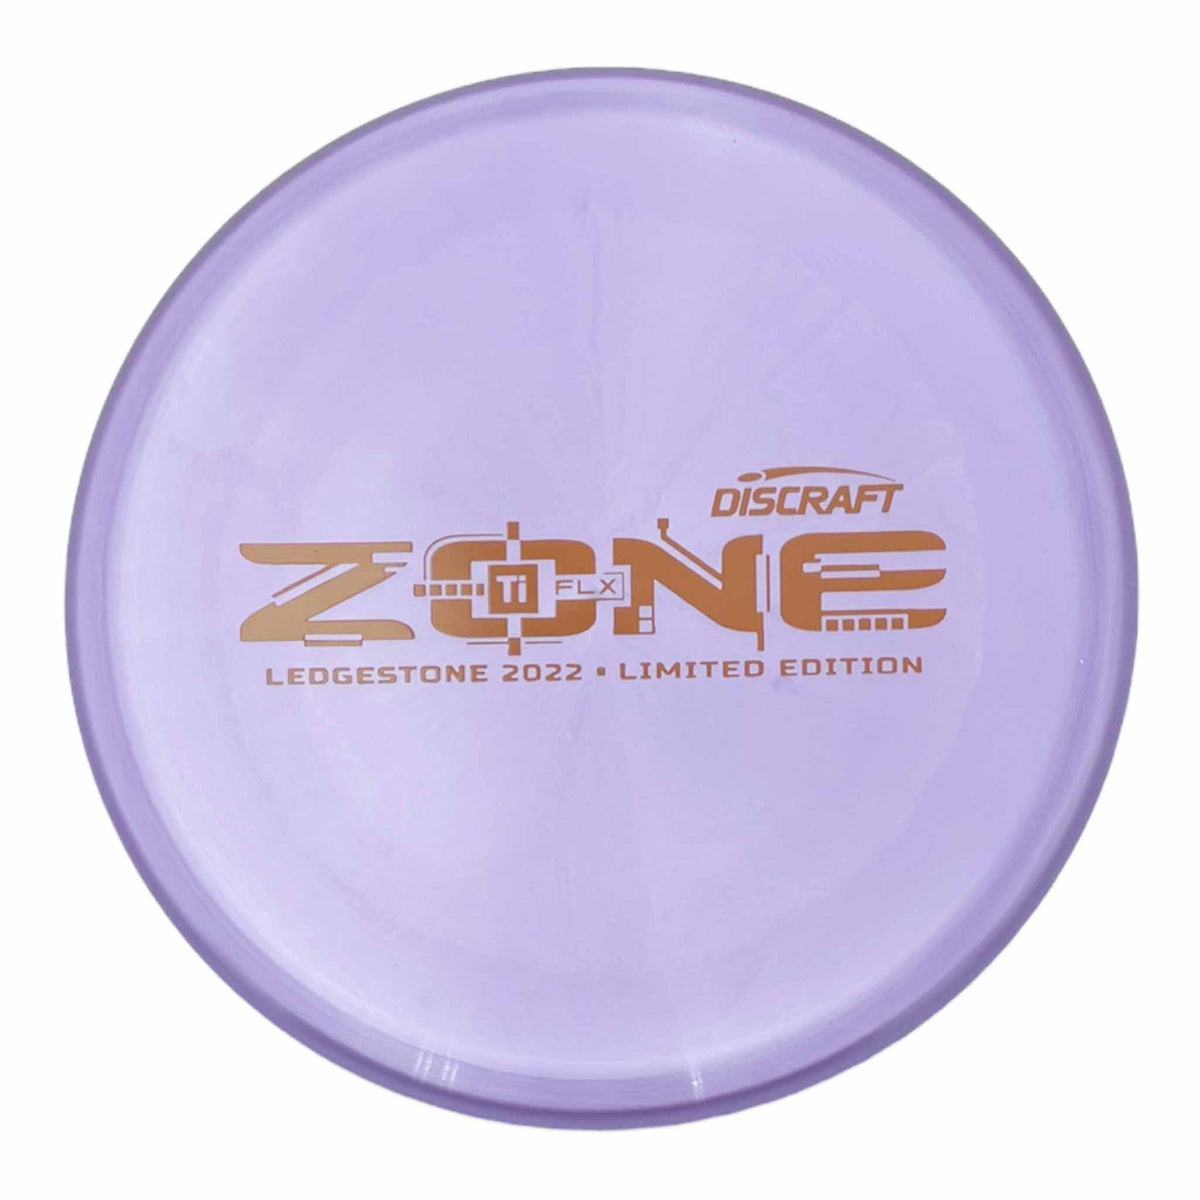 Discraft 2022 Ledgestione Limited Edition Ti FLX Zone putter and approach - Purple / Orange